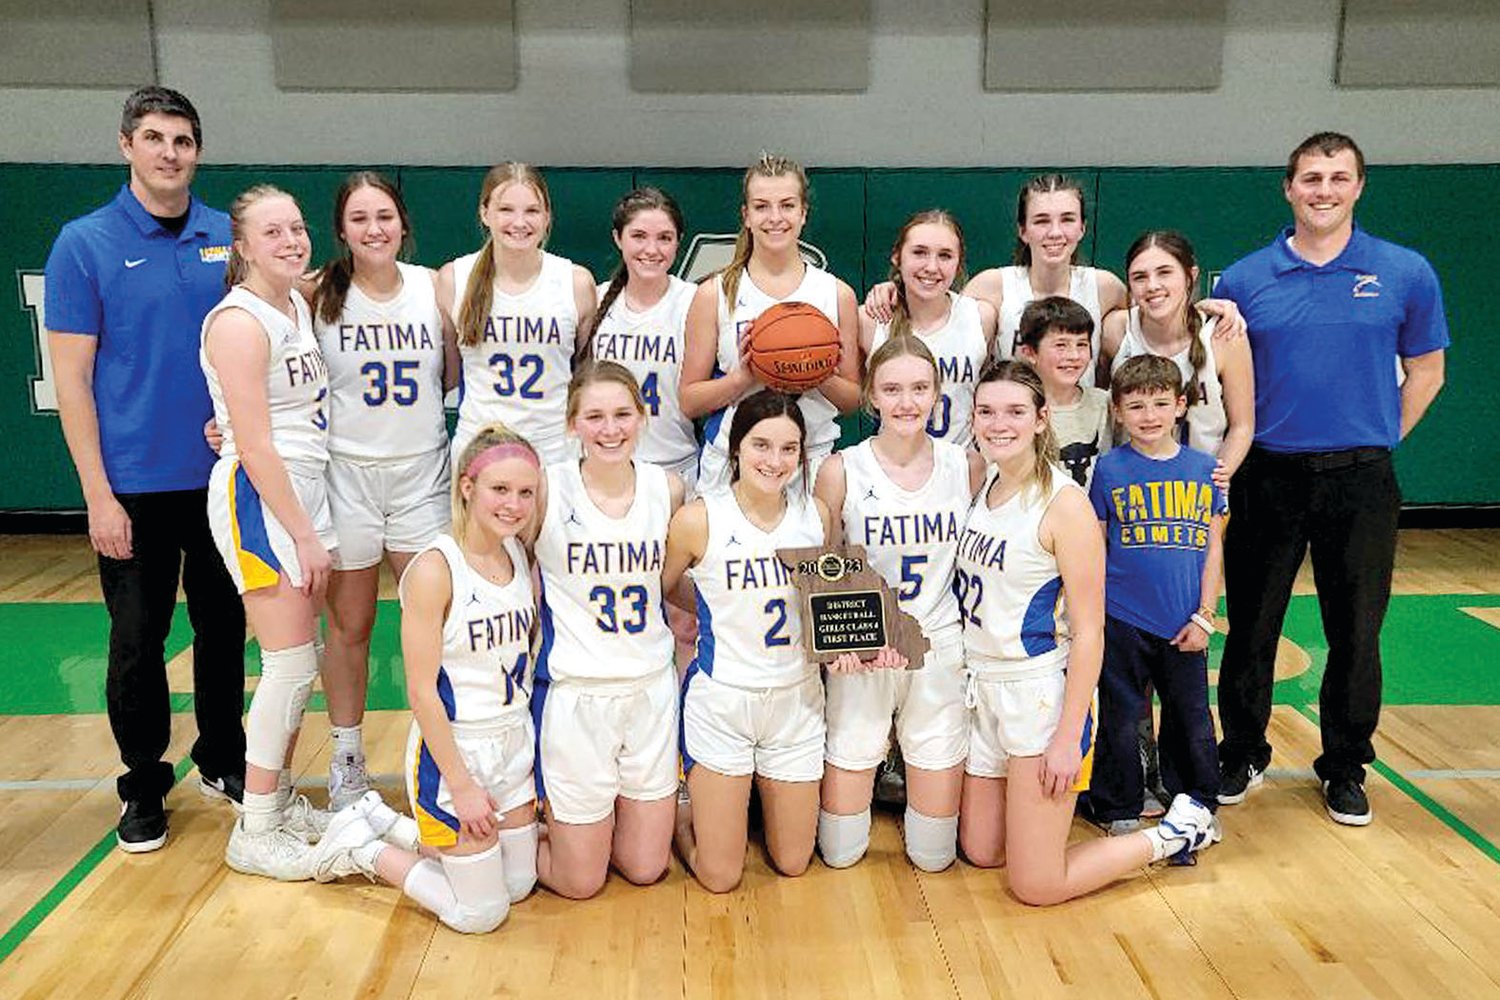 The Lady Comets claimed their first district title since 2014 with Saturday’s win over Eldon. Team members are, from left to right, front row, Kaitlyn Plassmeyer, Lydia Brunnert, Claire Bexten, Emma Bower, Ellie Brune, and Lincoln Baker; and in the back row, Coach Matt Baker, Kristen Robertson, Payton Wieberg, Madelyn Backes, Lucy Crede, Alli Robertson, Alex Berhorst, Vivian Bax, Natalie Wilbers, and Asst. Coach John Fick.